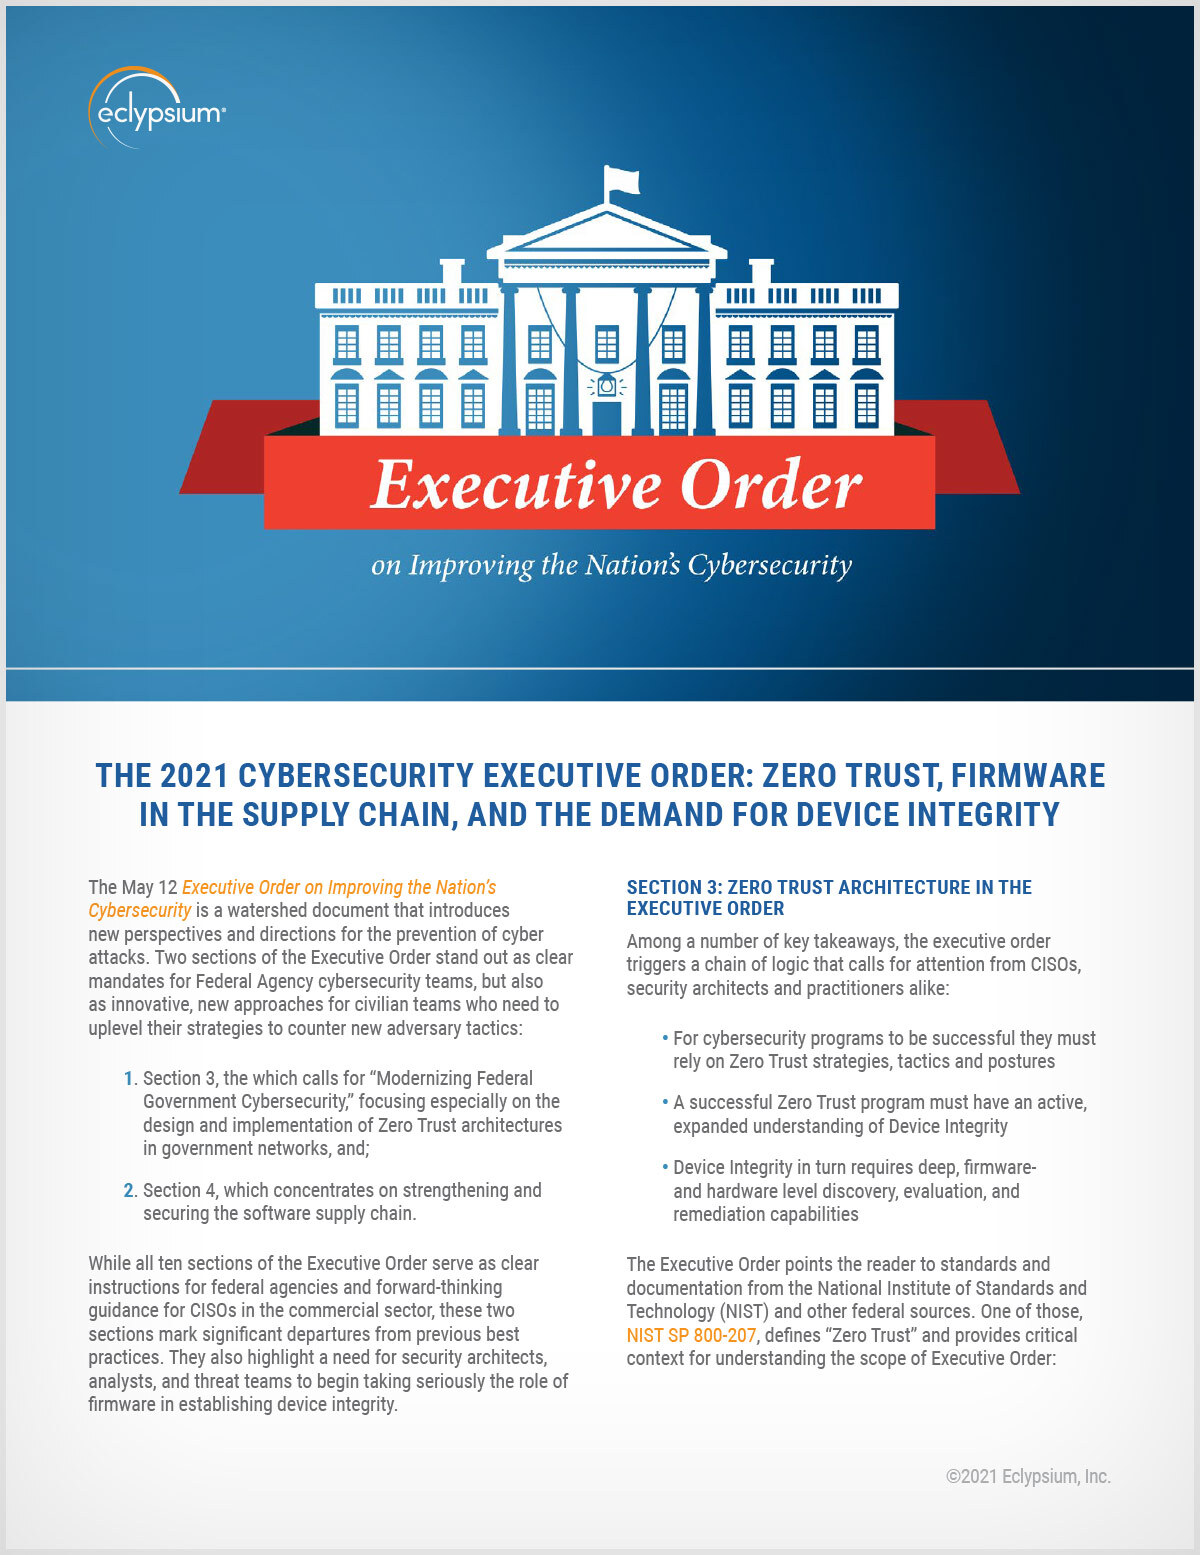 The 2021 Cybersecurity Executive Order: Zero Trust, Firmware in the Supply Chain, and the Demand for Device Integrity